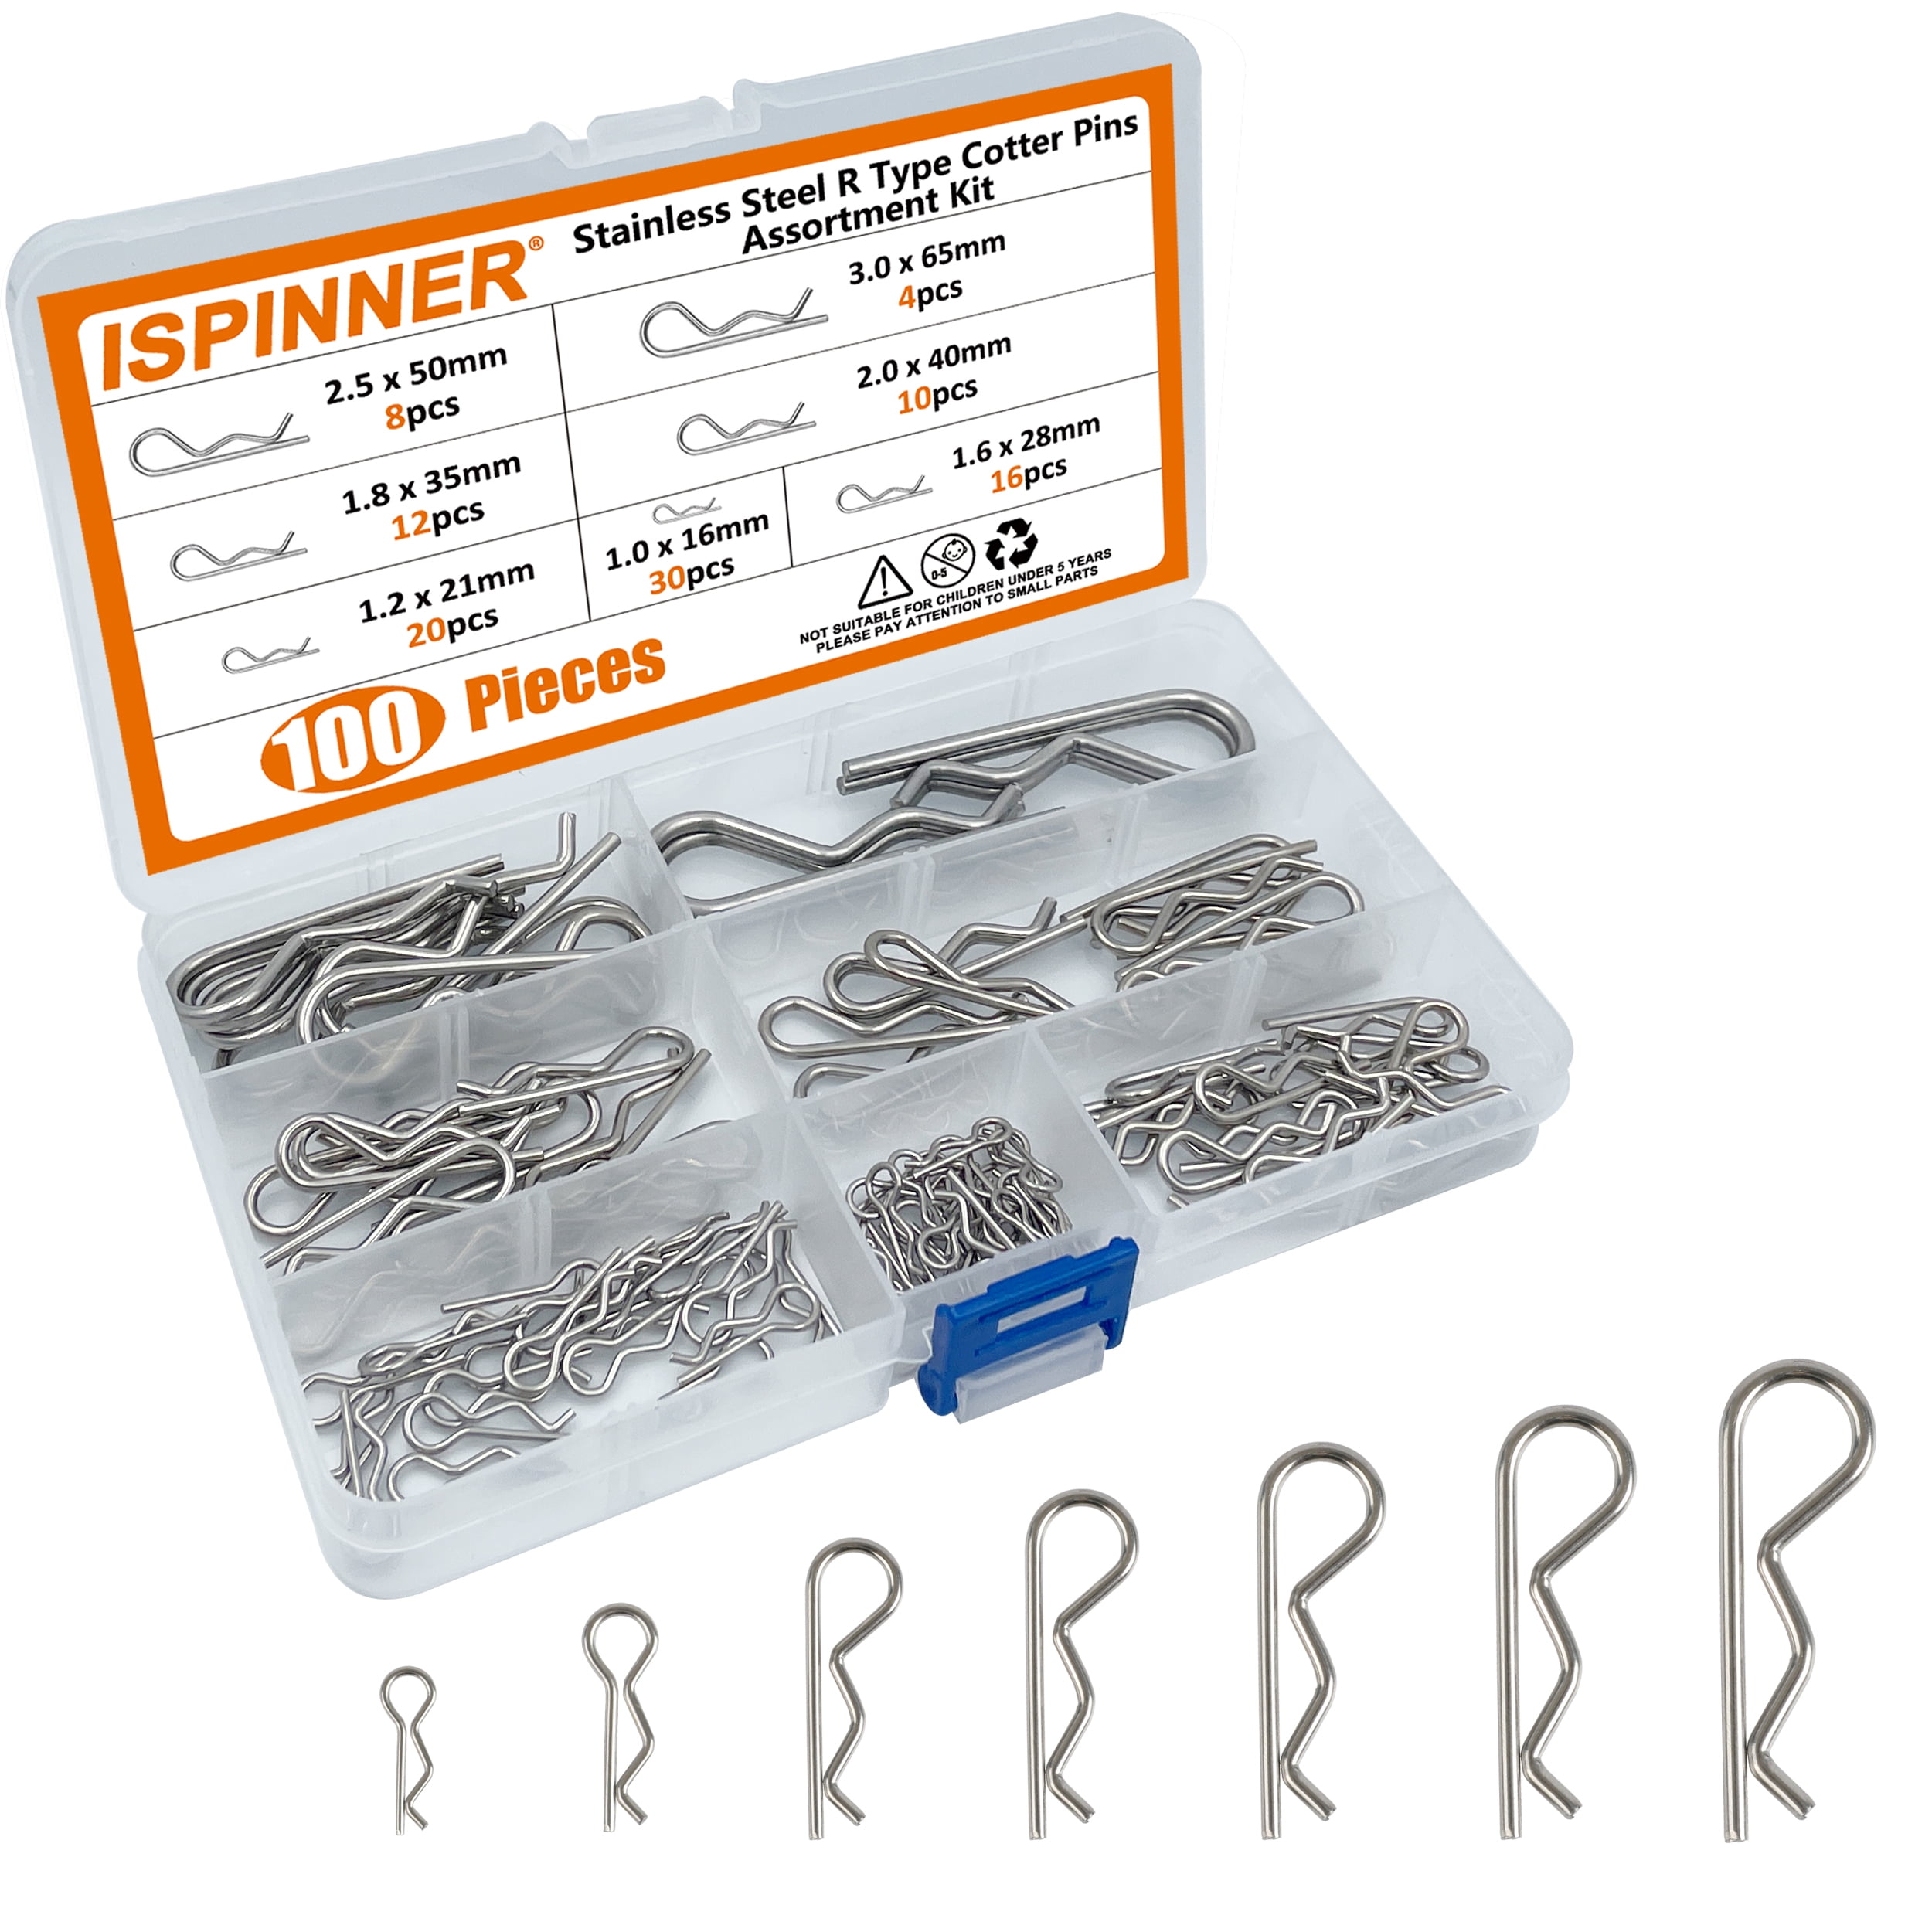 Pins Split Retaining Clips 100pc Box of Assorted Cotter Pin 